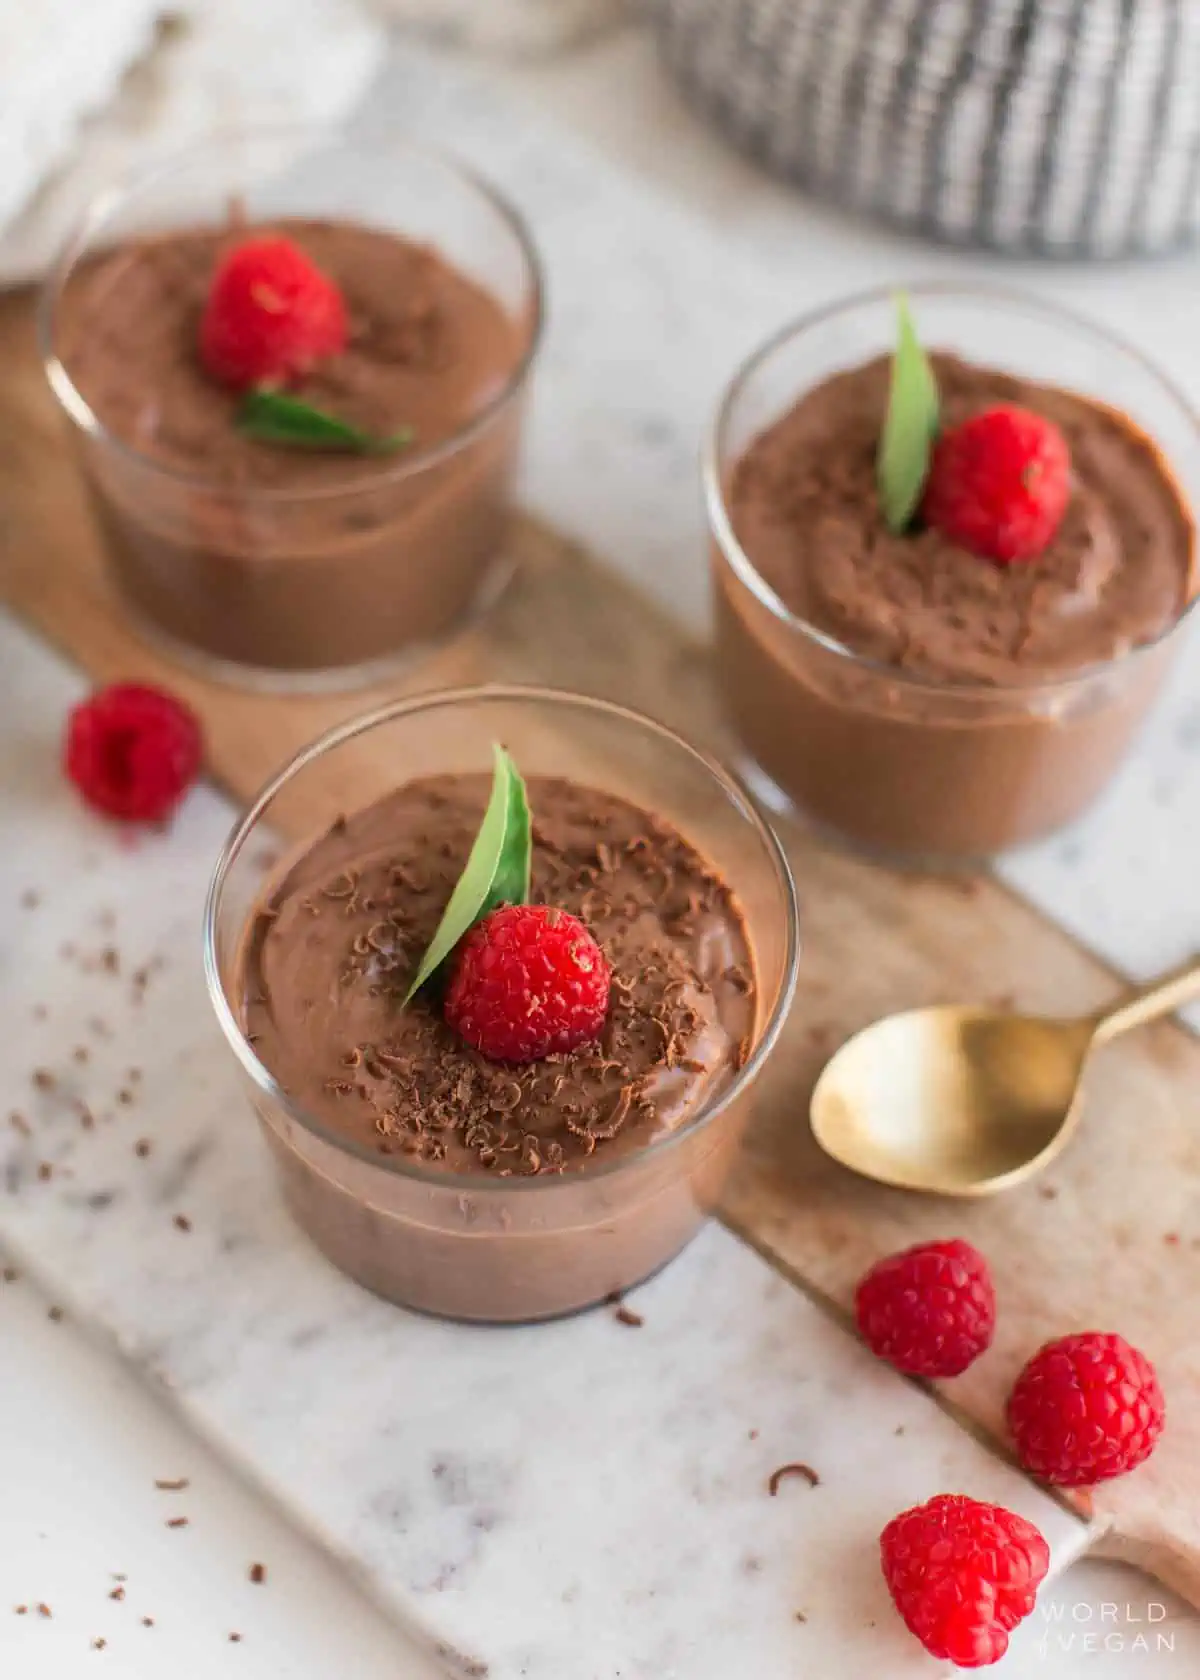 Small glass bowls of silken tofu chocolate mousse with raspberries scattered around.